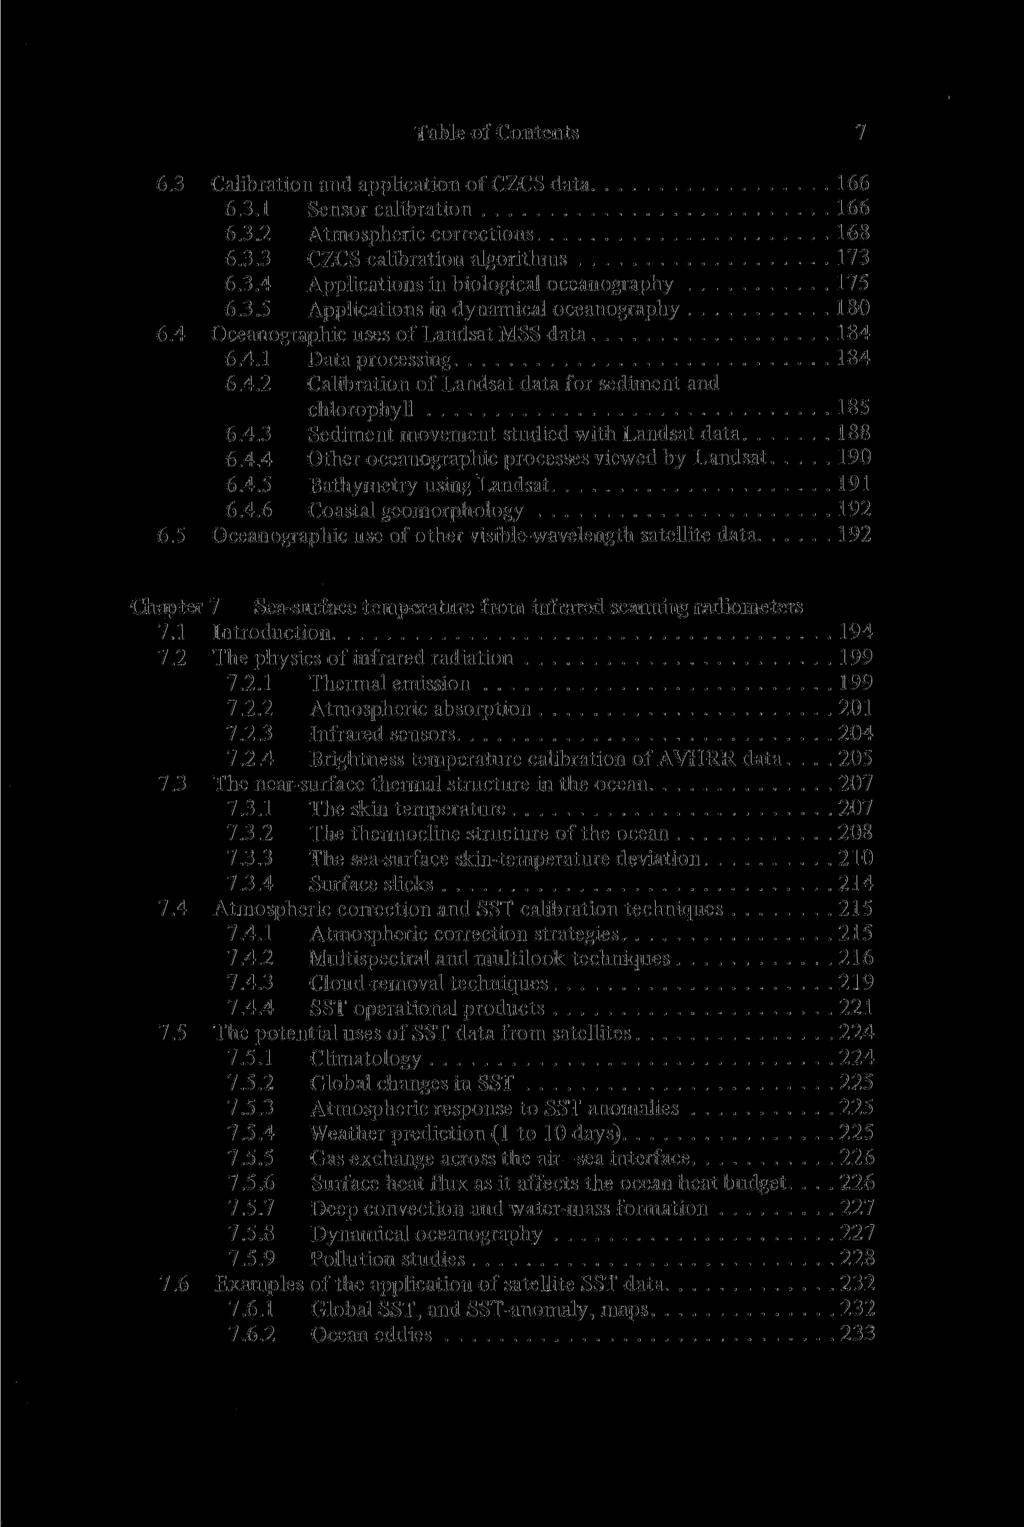 Table of Contents 7 6.3 Calibration and application of CZCS data 166 6.3.1 Sensor calibration 166 6.3.2 Atmospheric corrections 168 6.3.3 CZCS calibration algorithms 173 6.3.4 Applications in biological oceanography 175 6.